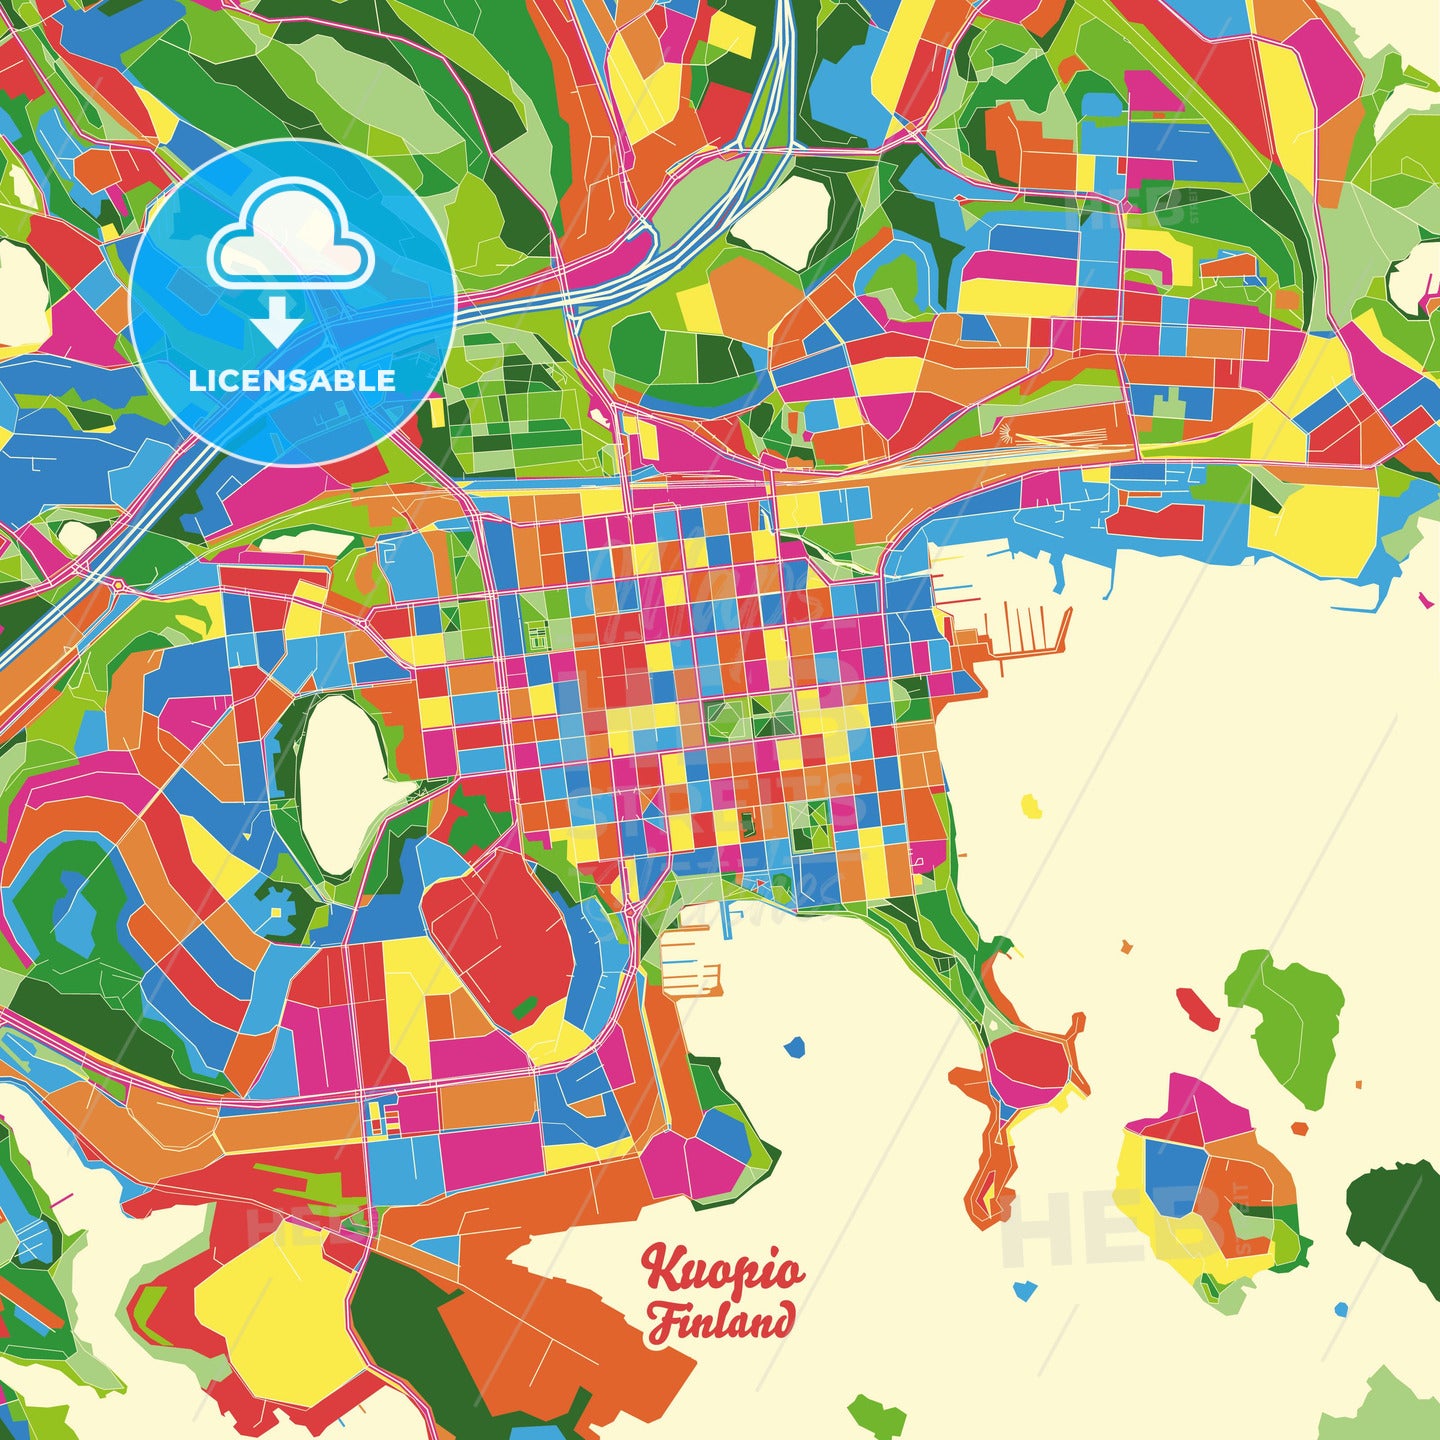 Kuopio, Finland Crazy Colorful Street Map Poster Template - HEBSTREITS Sketches